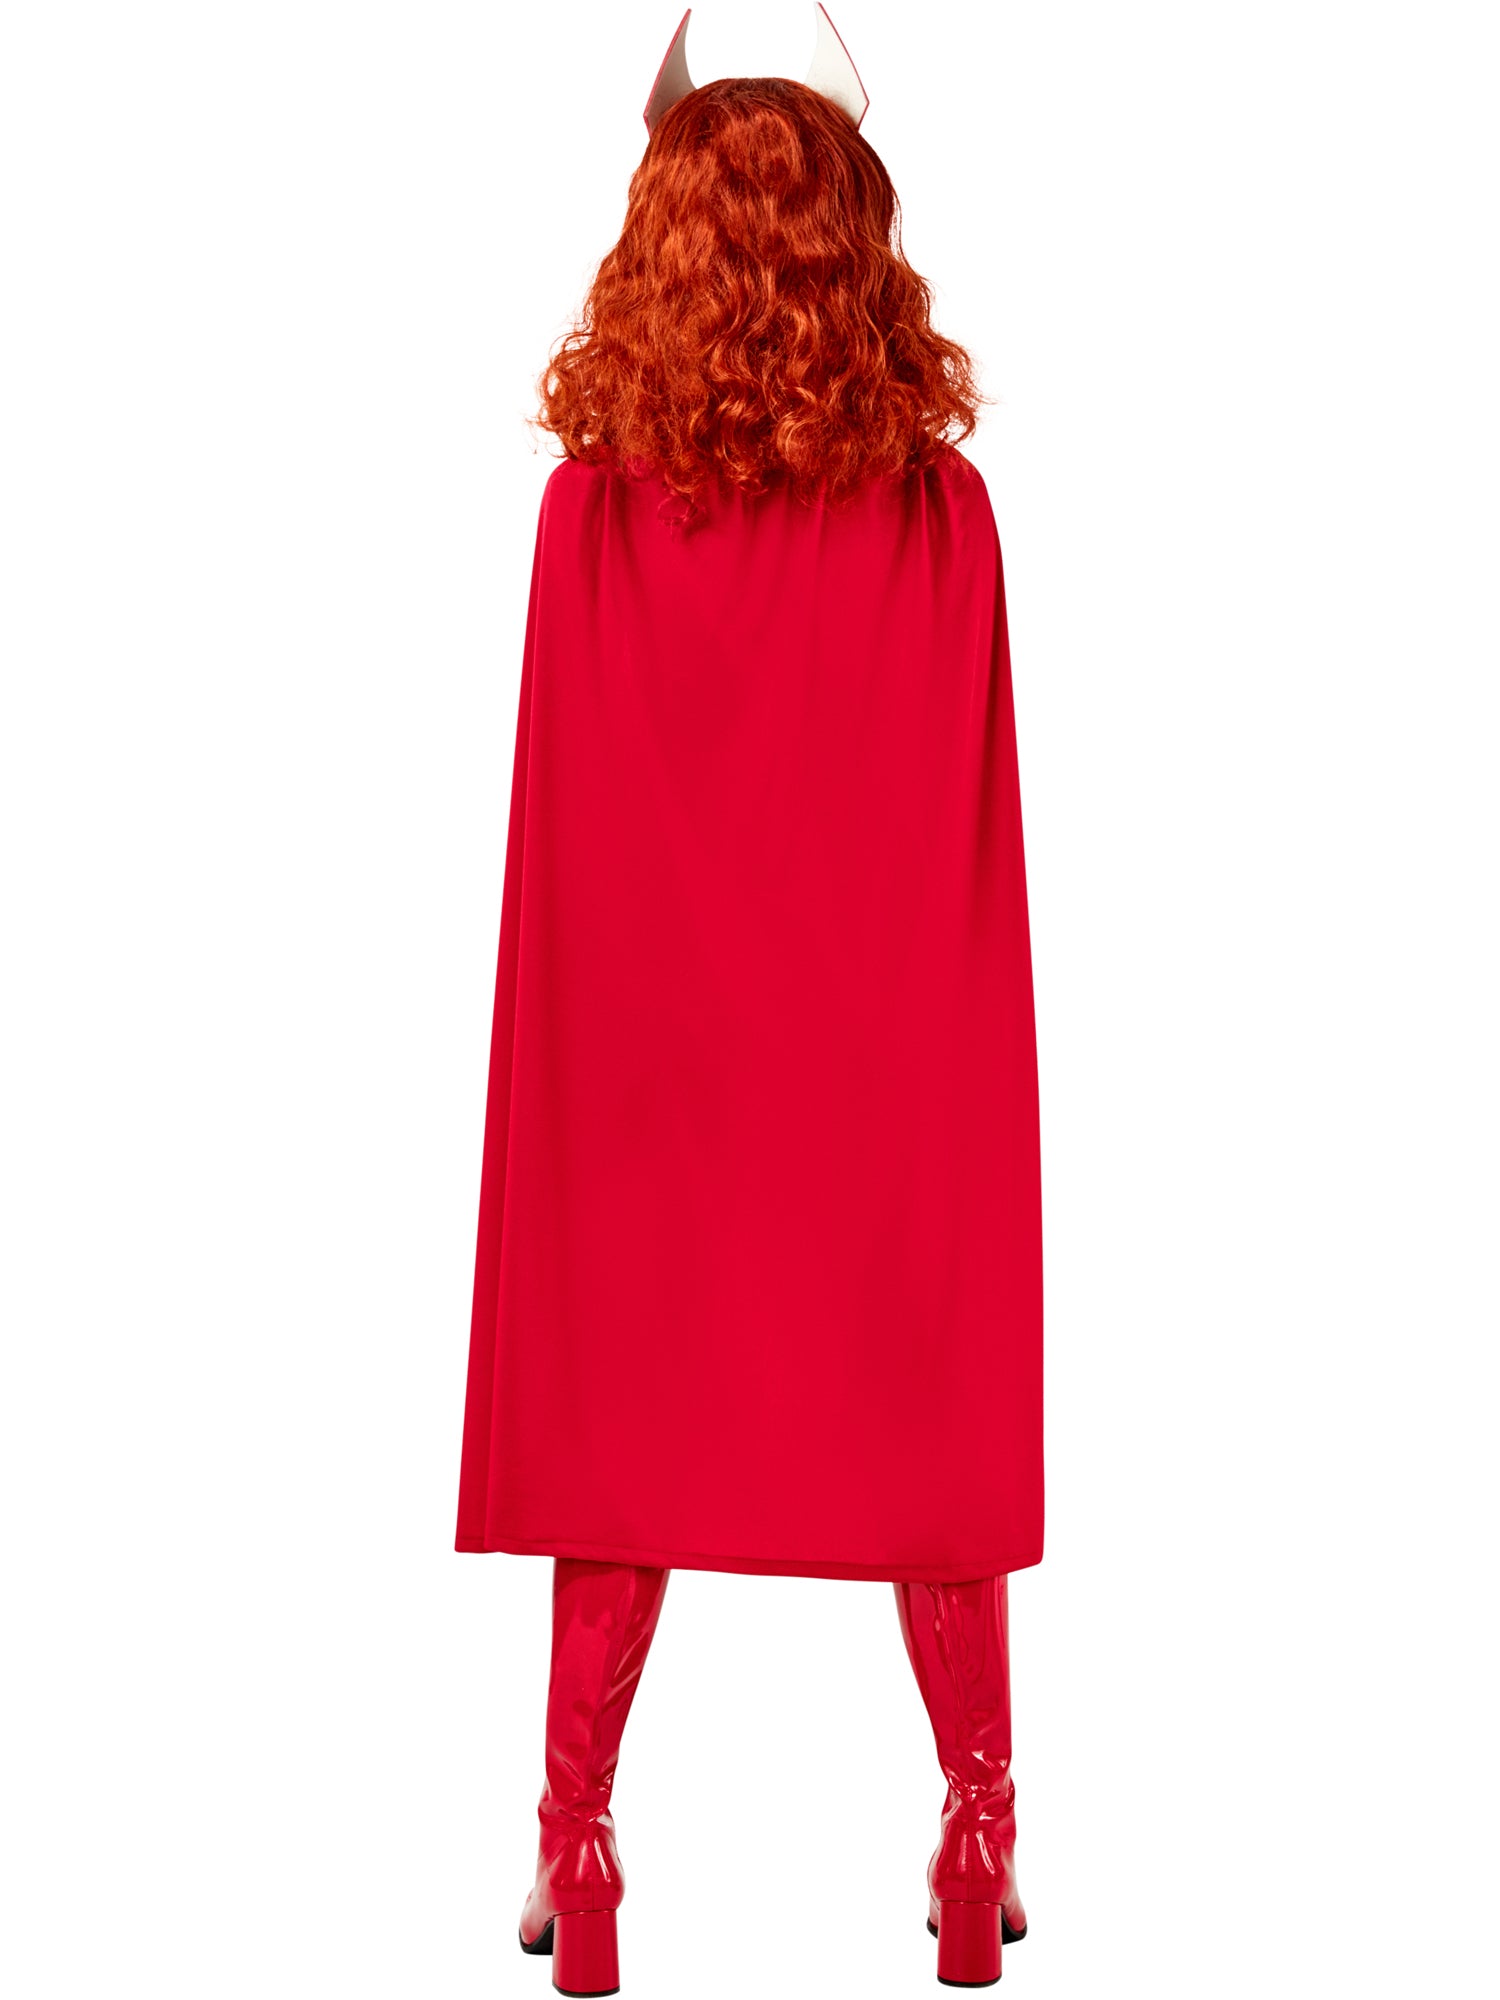 Scarlet Witch, Multi, Marvel, Adult Costume, Extra Large, Other